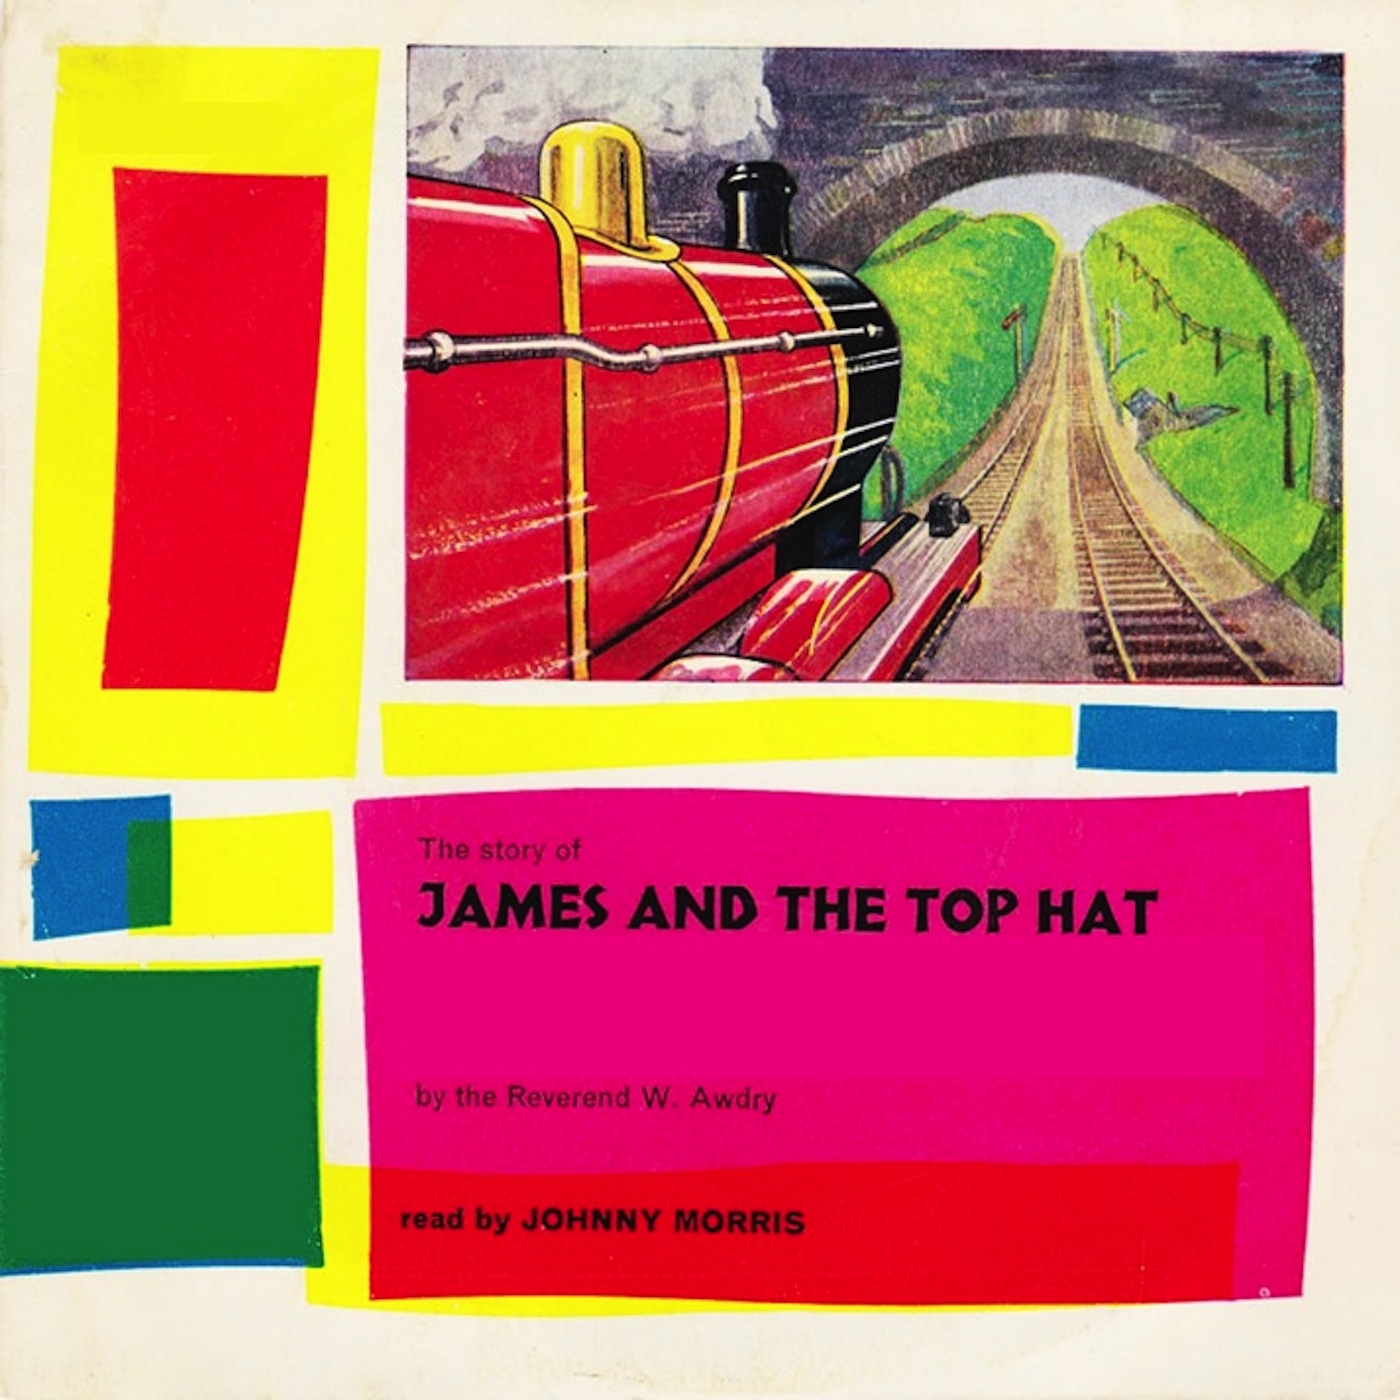 James and the Top Hat